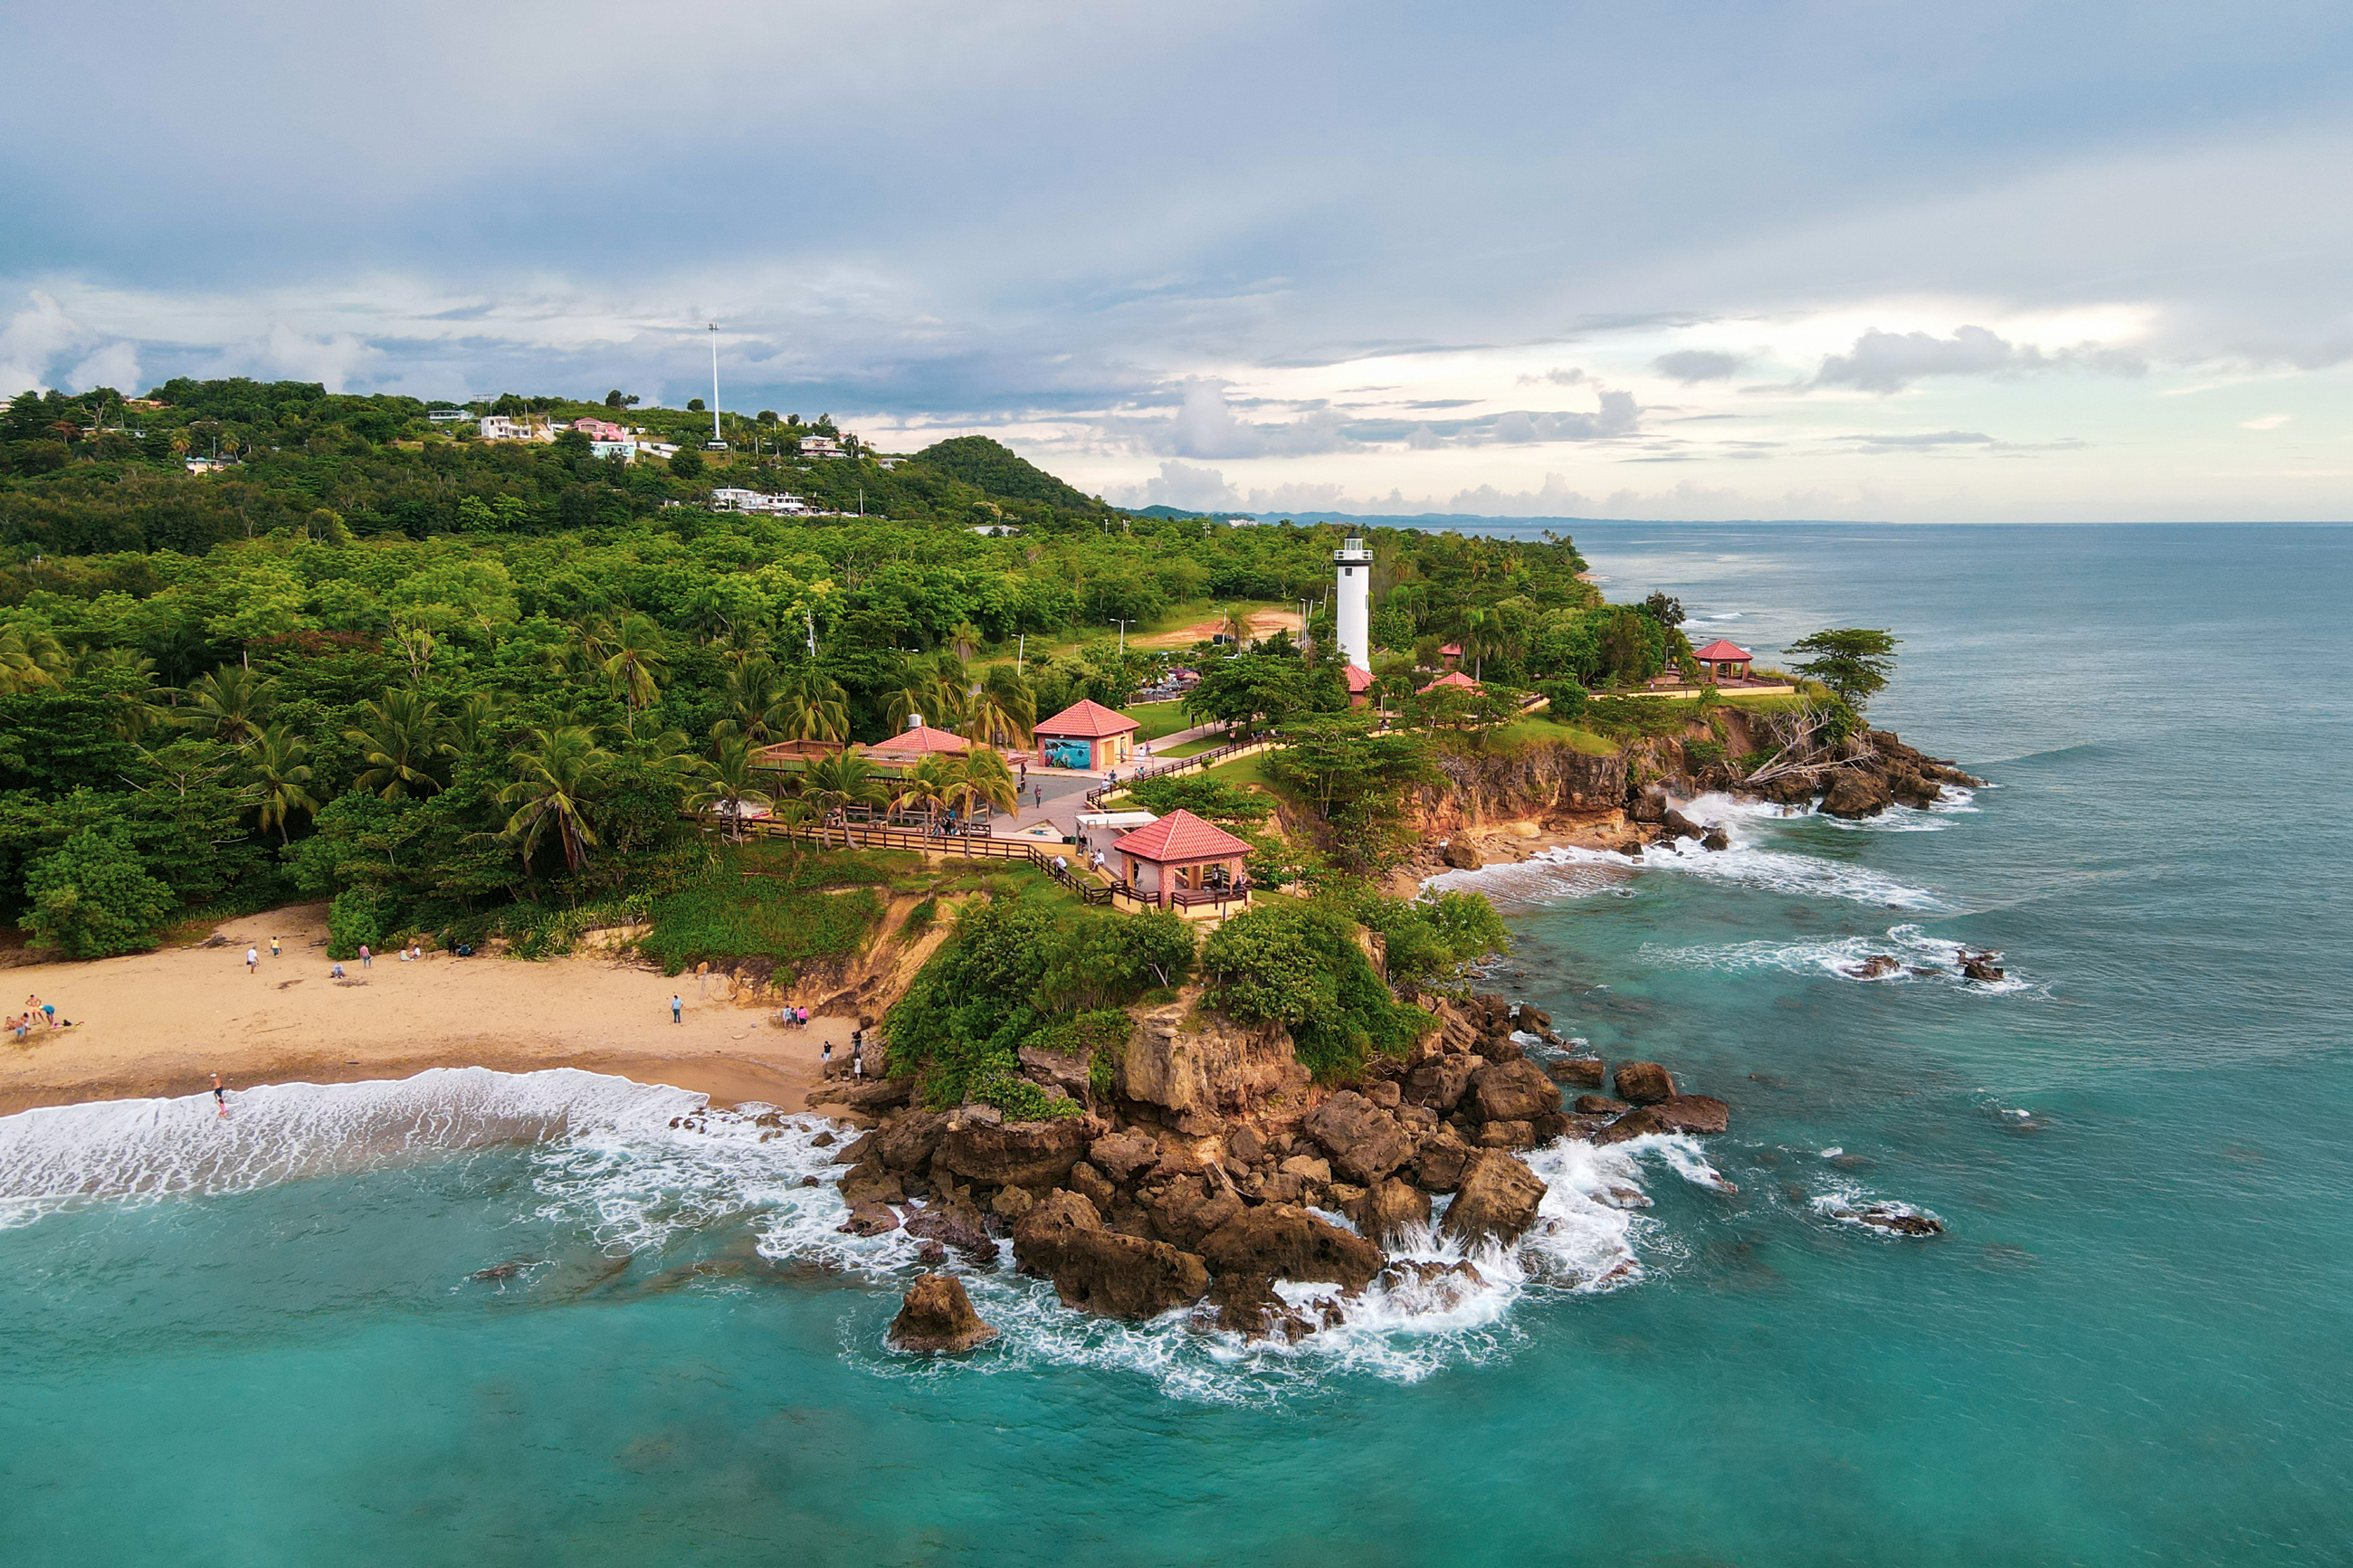 El Aerial Drone Photography of waves crashing near the lighthouse in Rincon, Puerto Rico